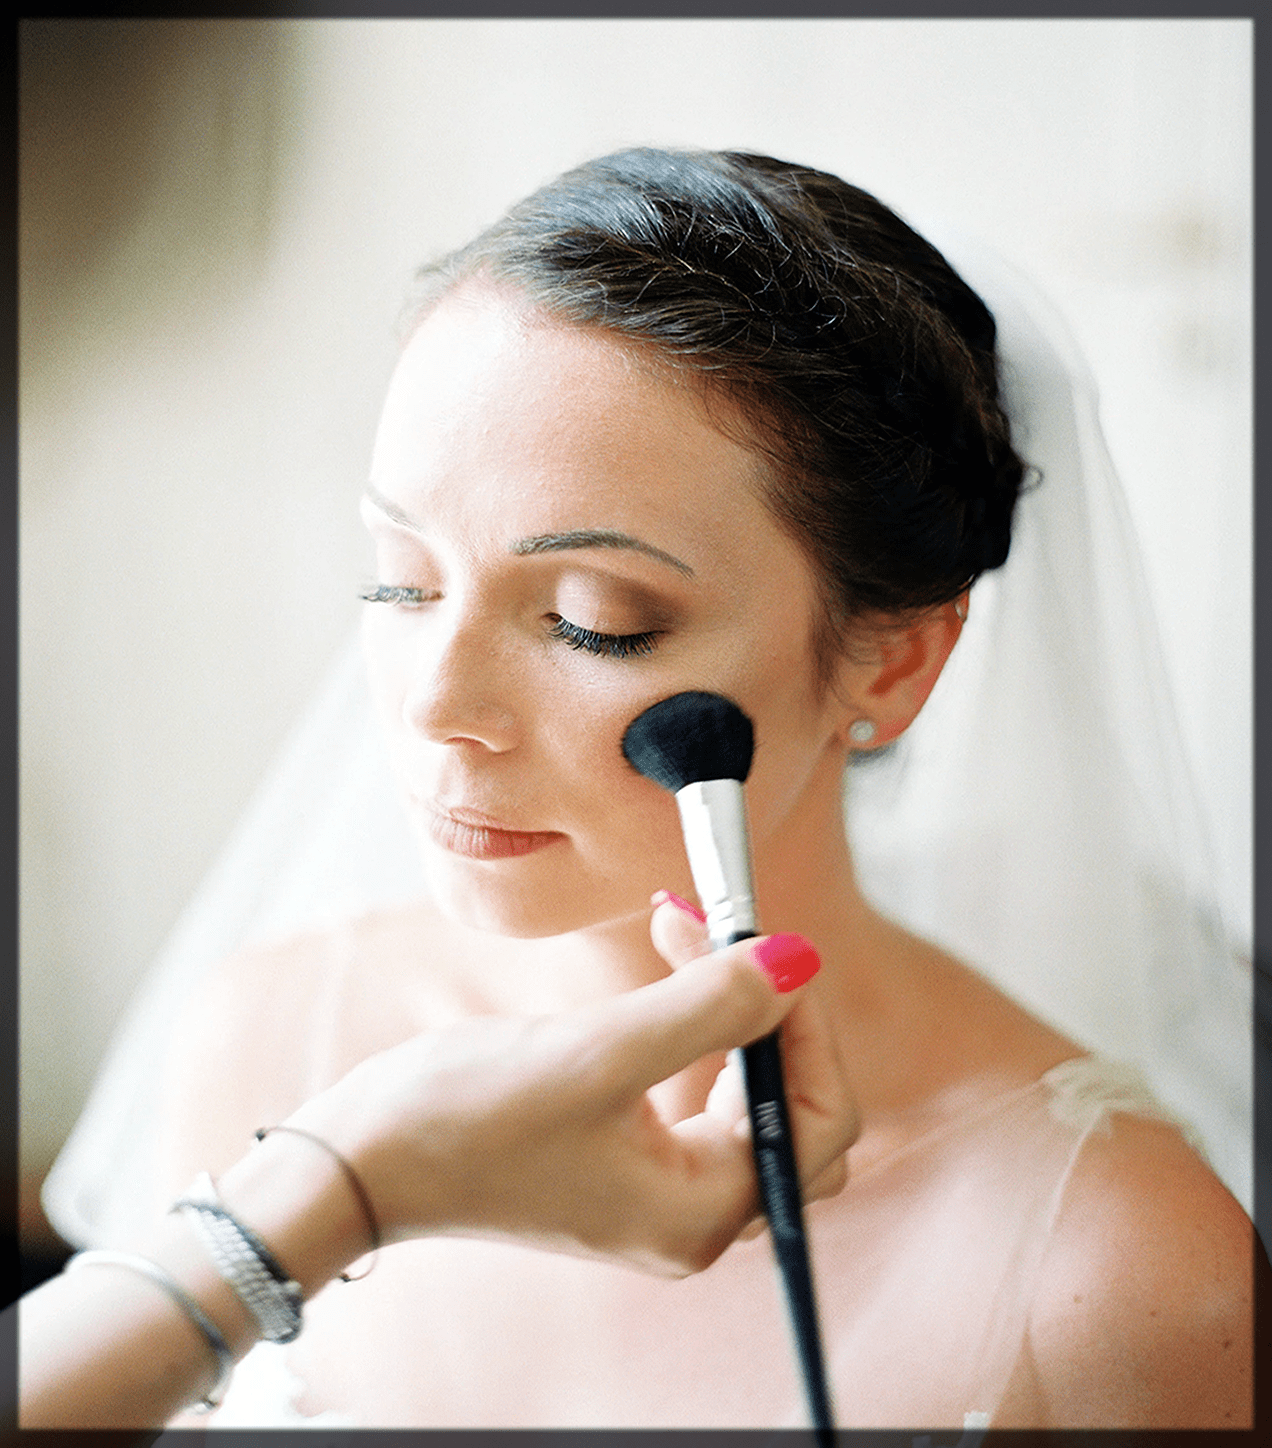 how to apply blush